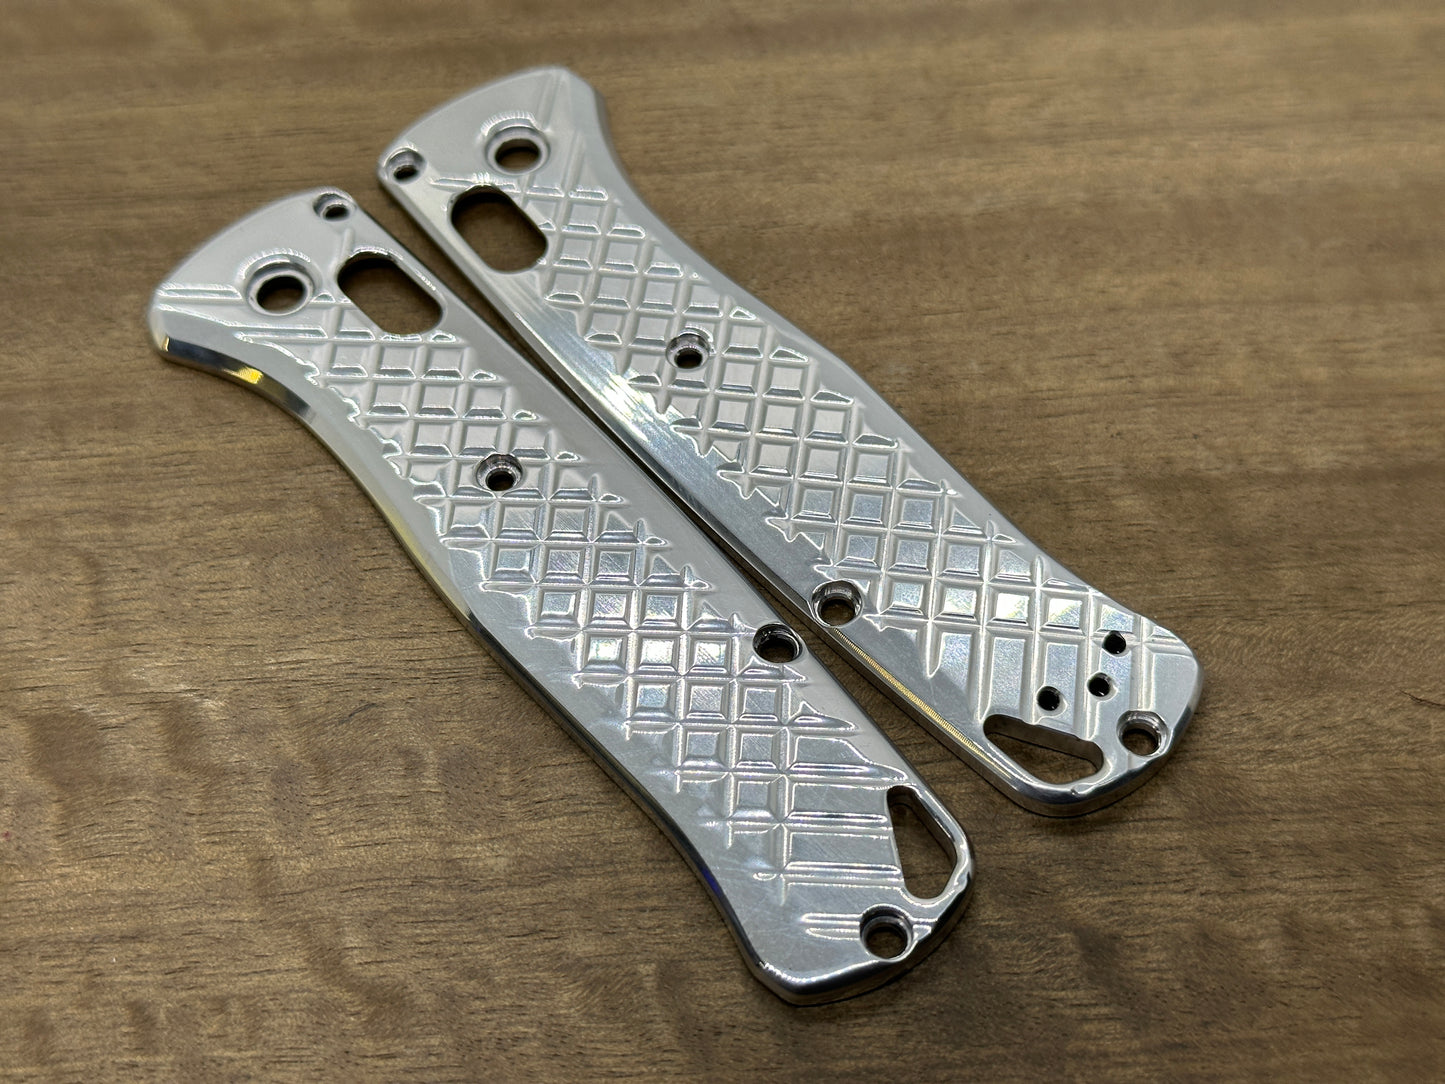 Polished FRAG milled Aerospace Aluminum Scales for Benchmade Bugout 535